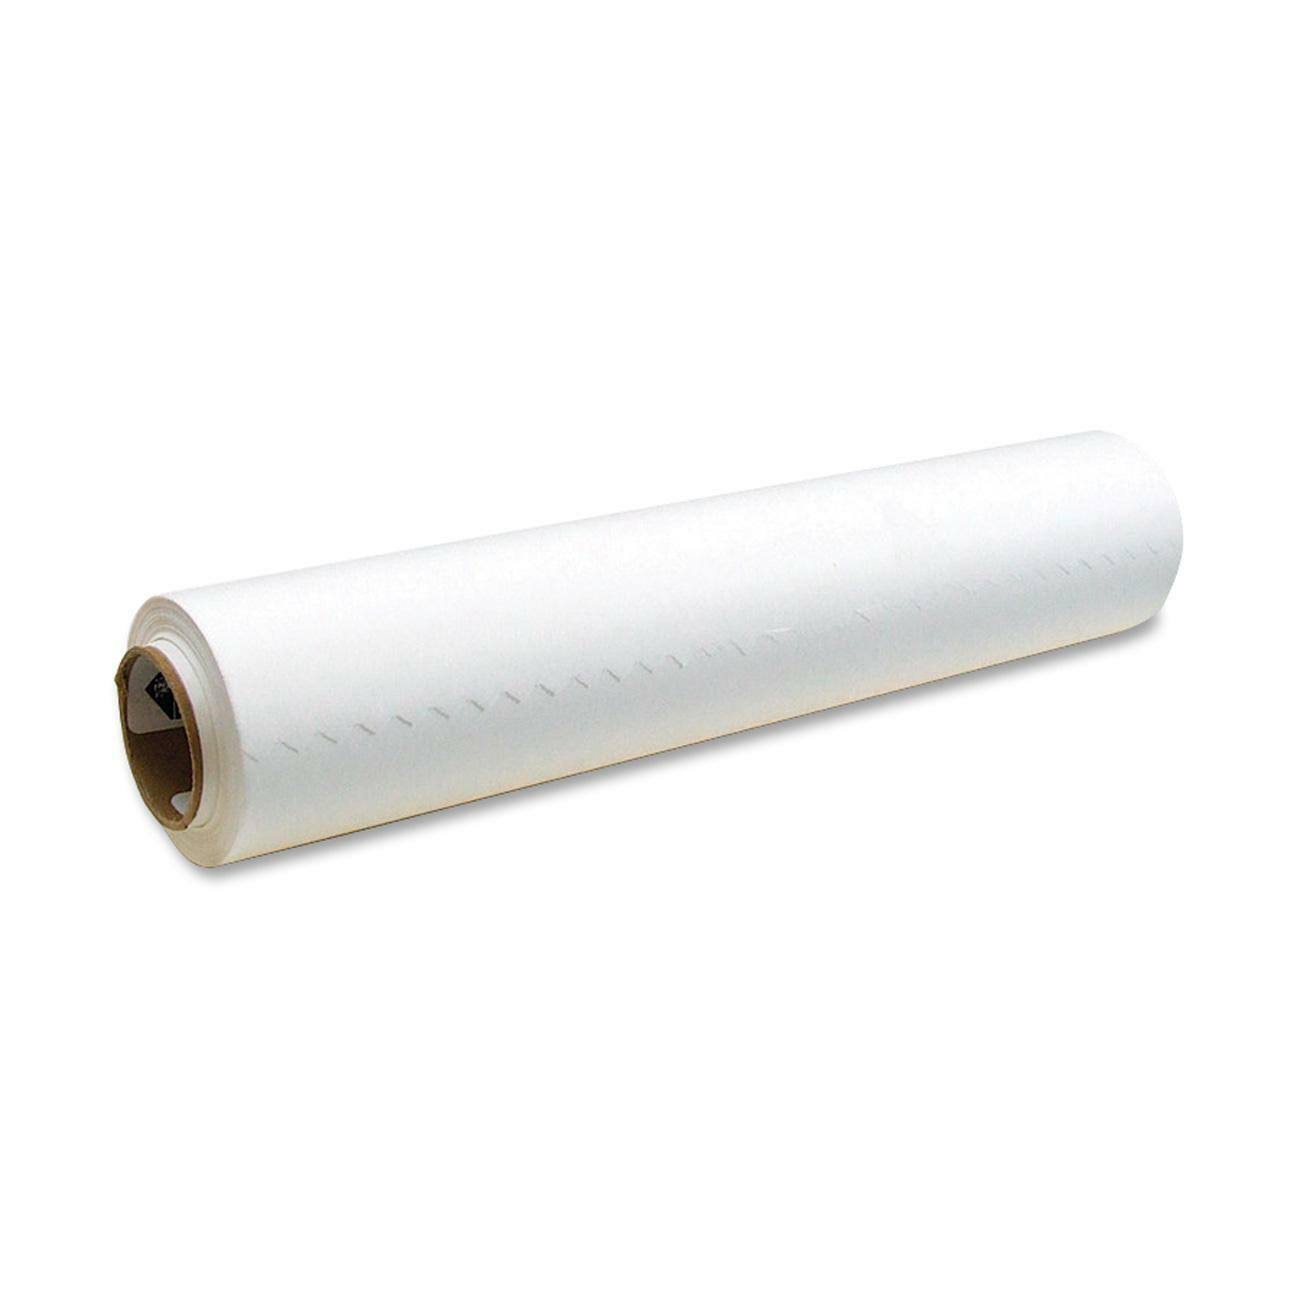 Bienfang Wide Sketching and Tracing Paper Roll Art - 50yd x 24"